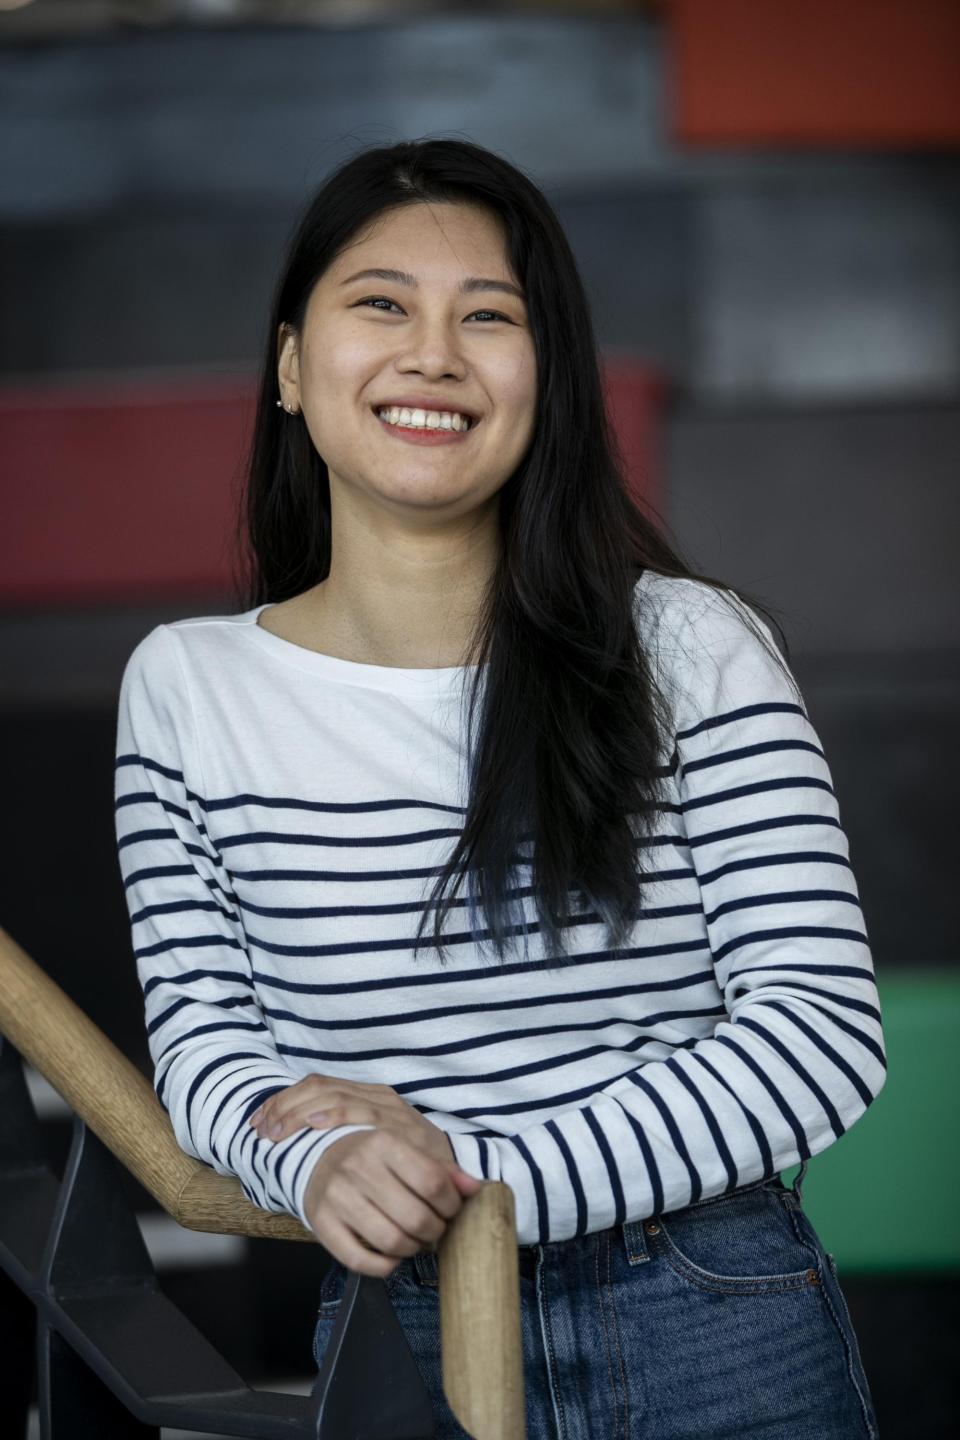 An Asian woman posing for the camera on a flight on stairs. She is wearing a white jumper and smiling to the camera.